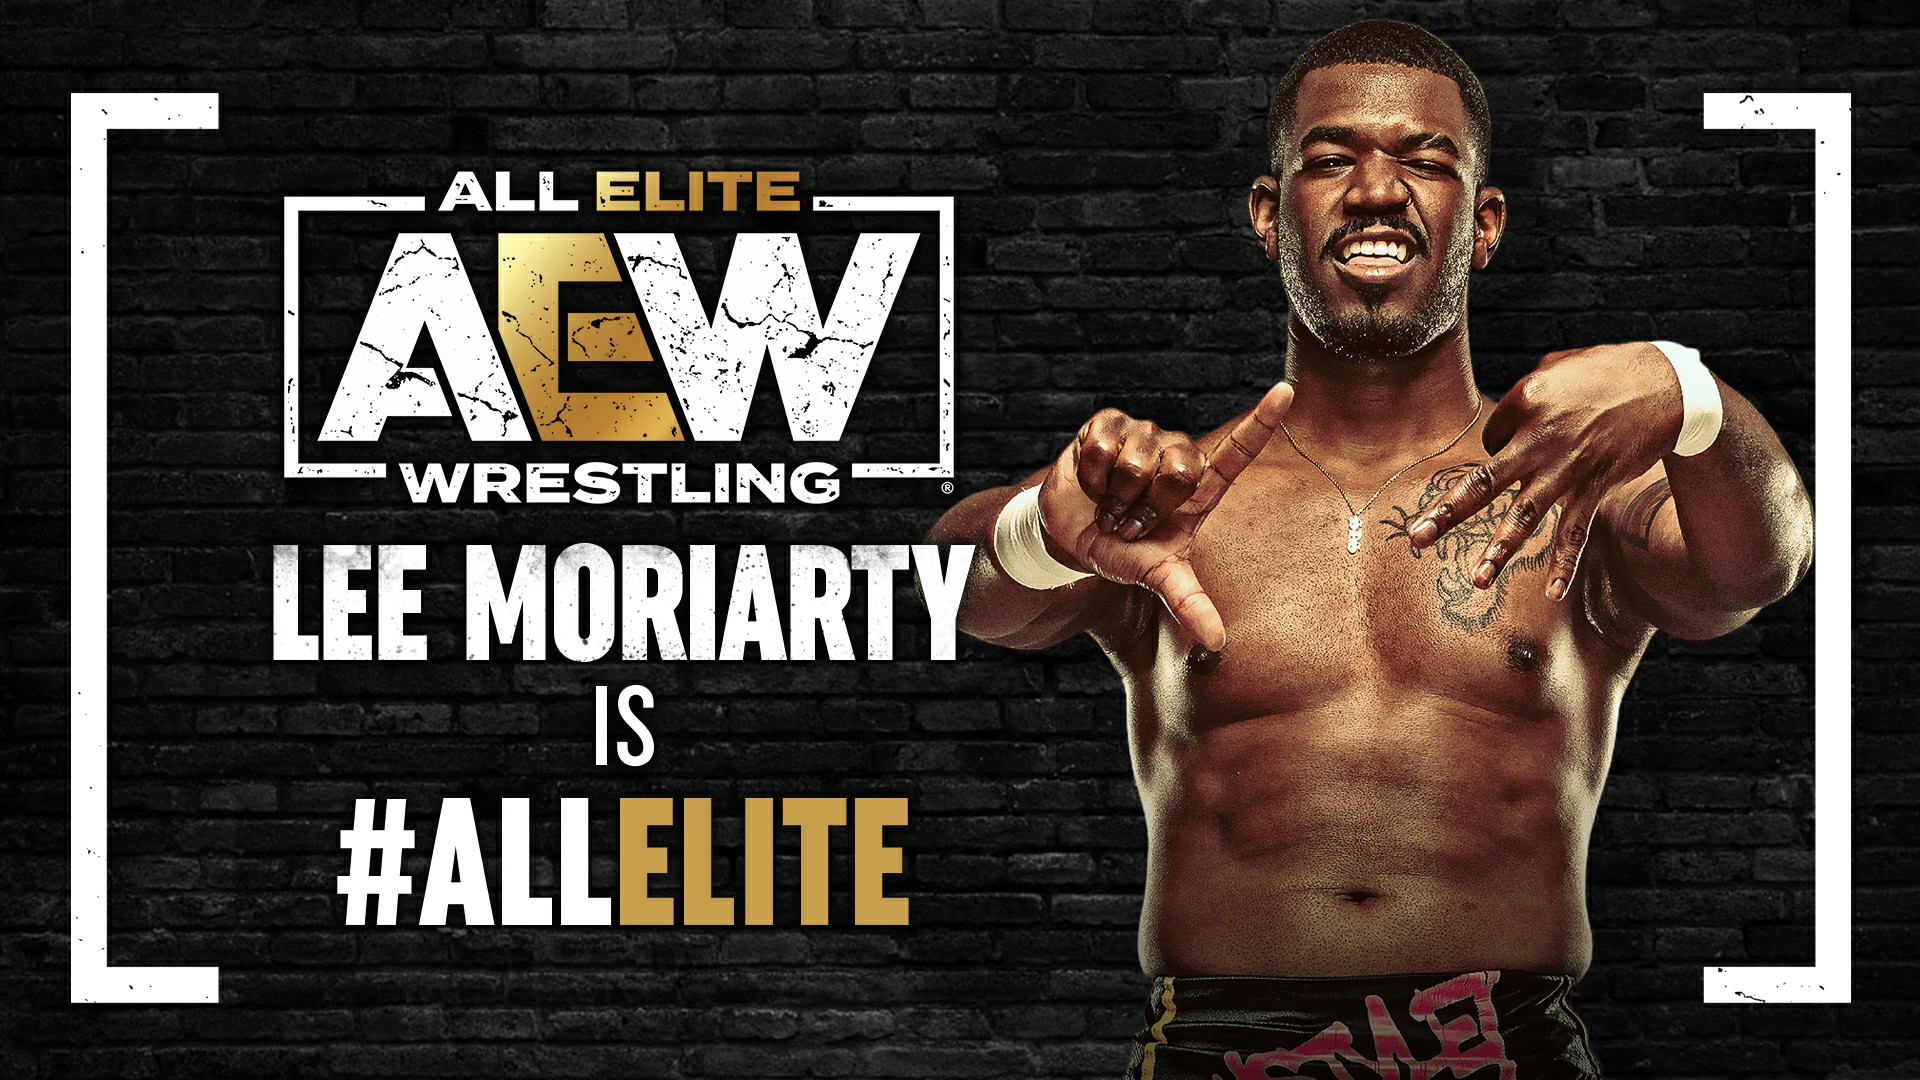 AEW Officially Welcomes Lee Moriarty After Loss to Bobby Fish